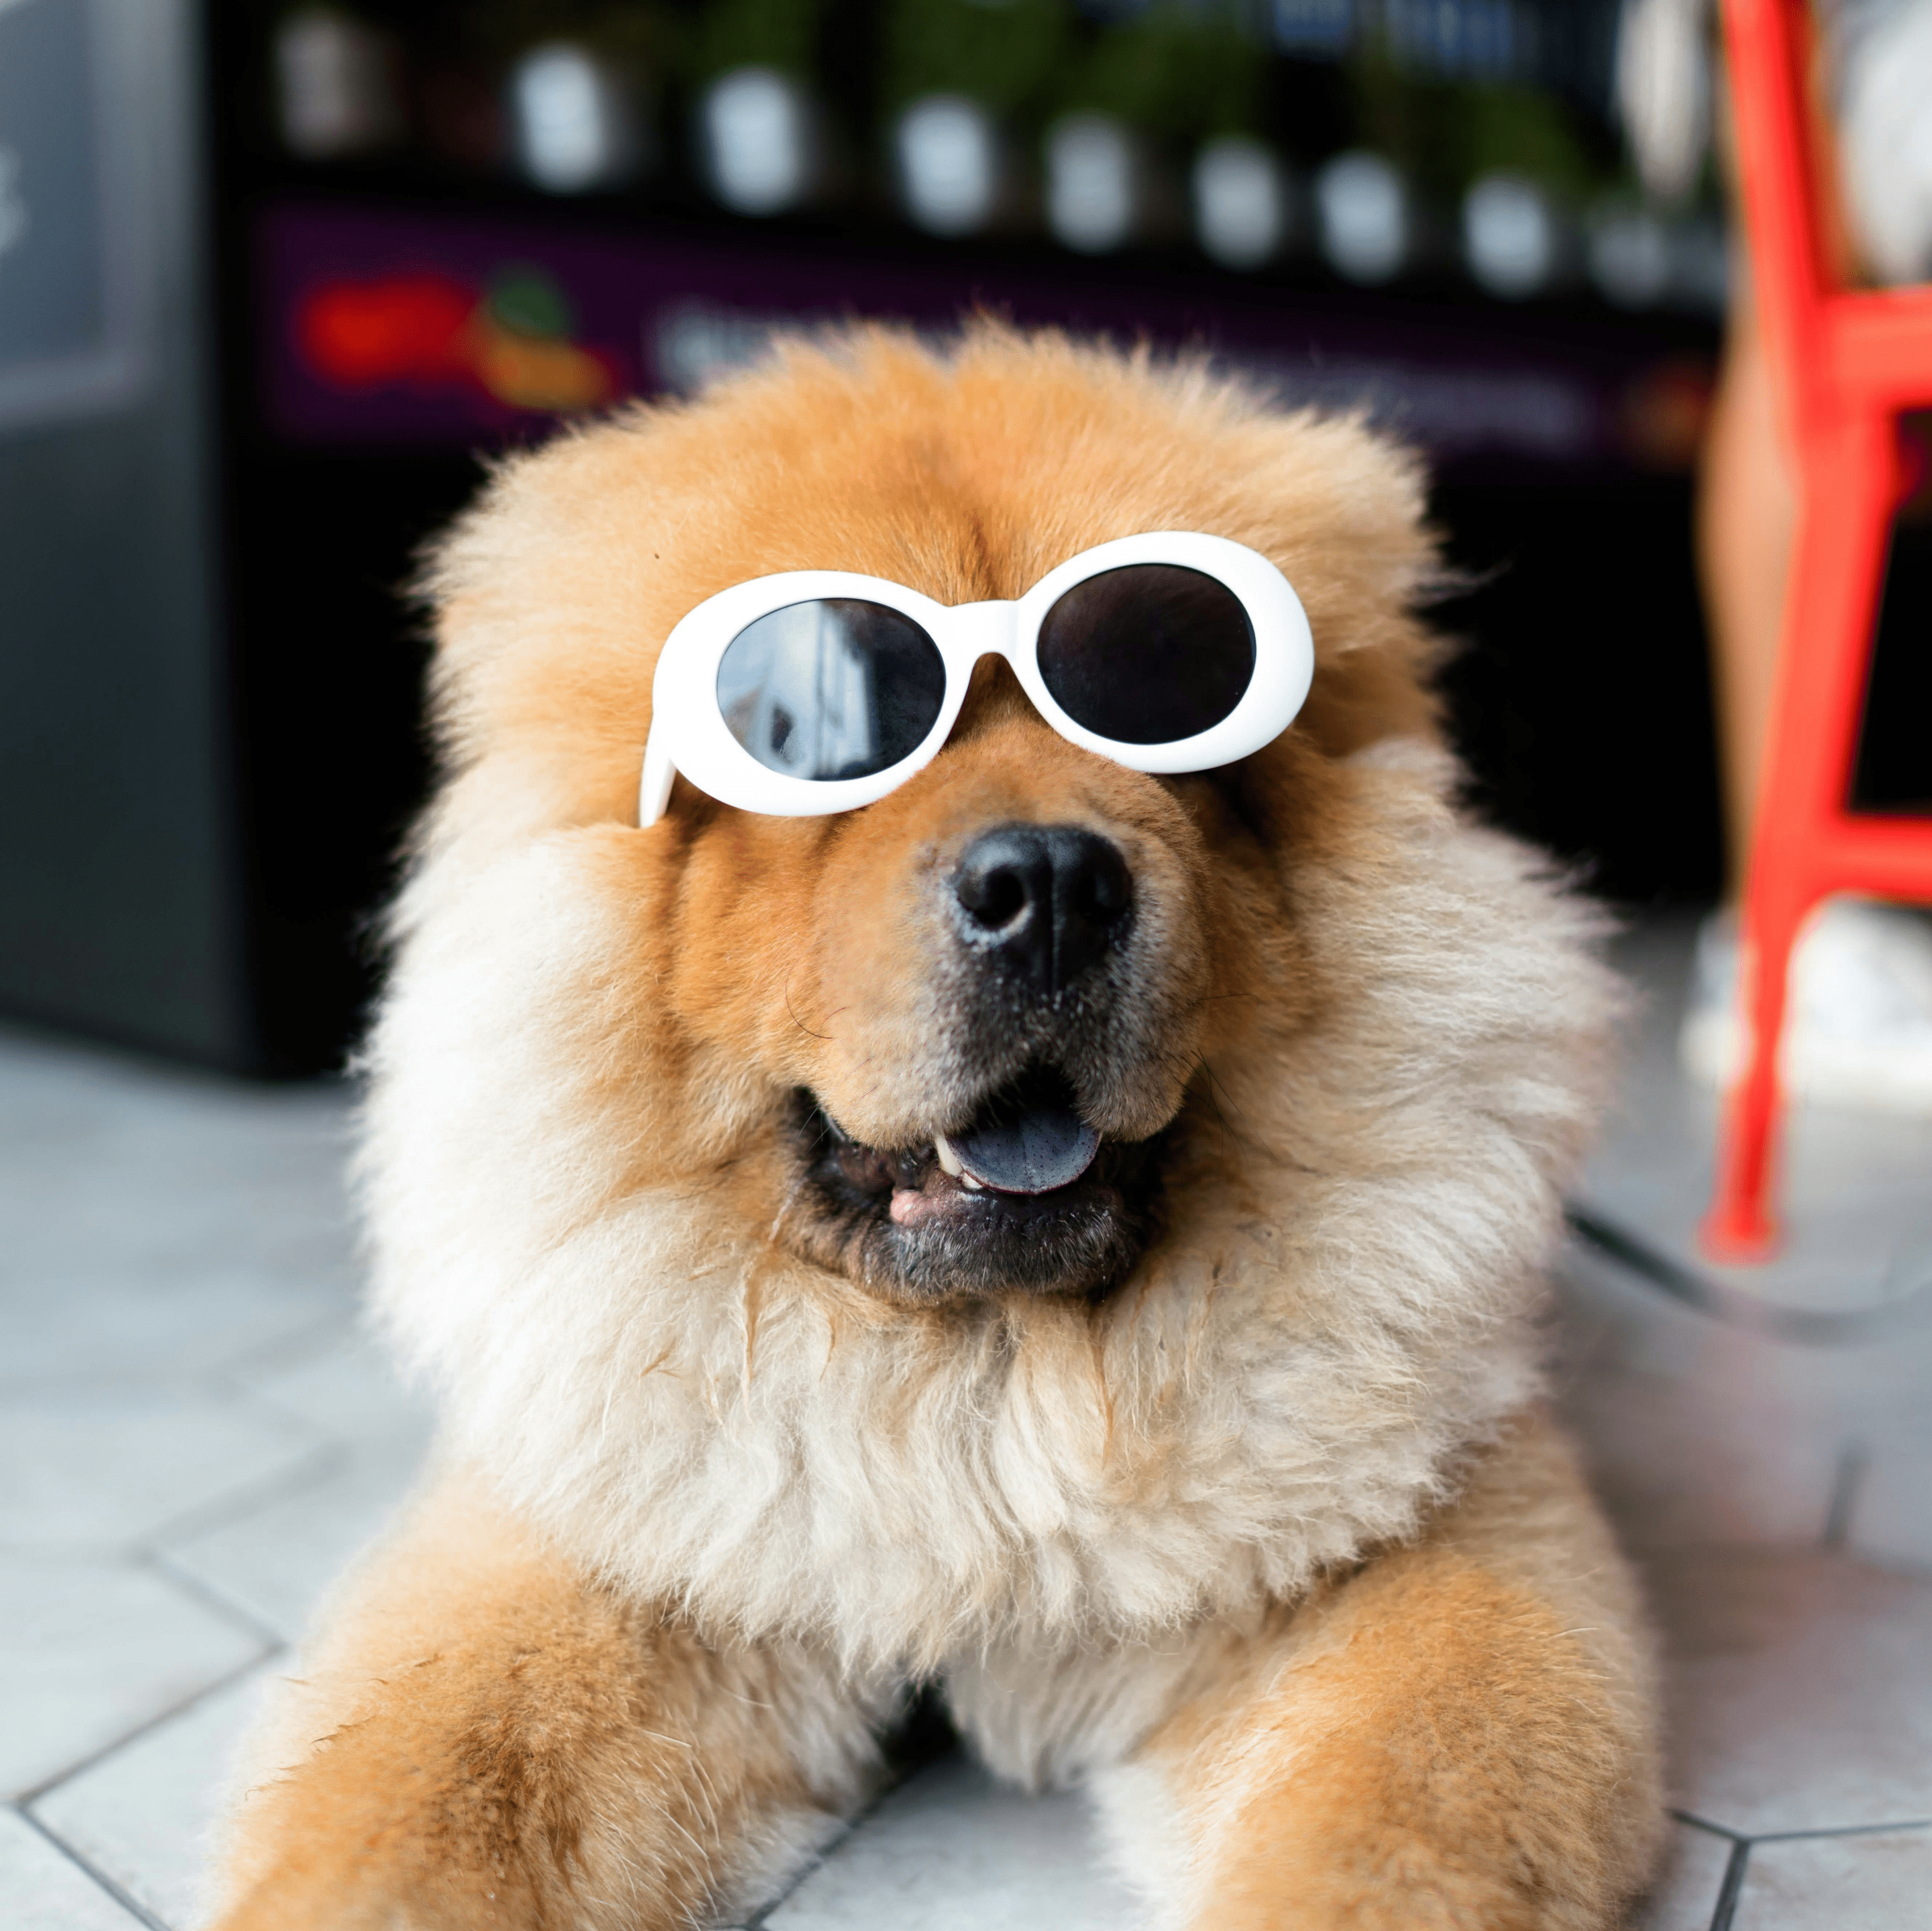 a dog wearing sunglasses<br />
NGWork Academy